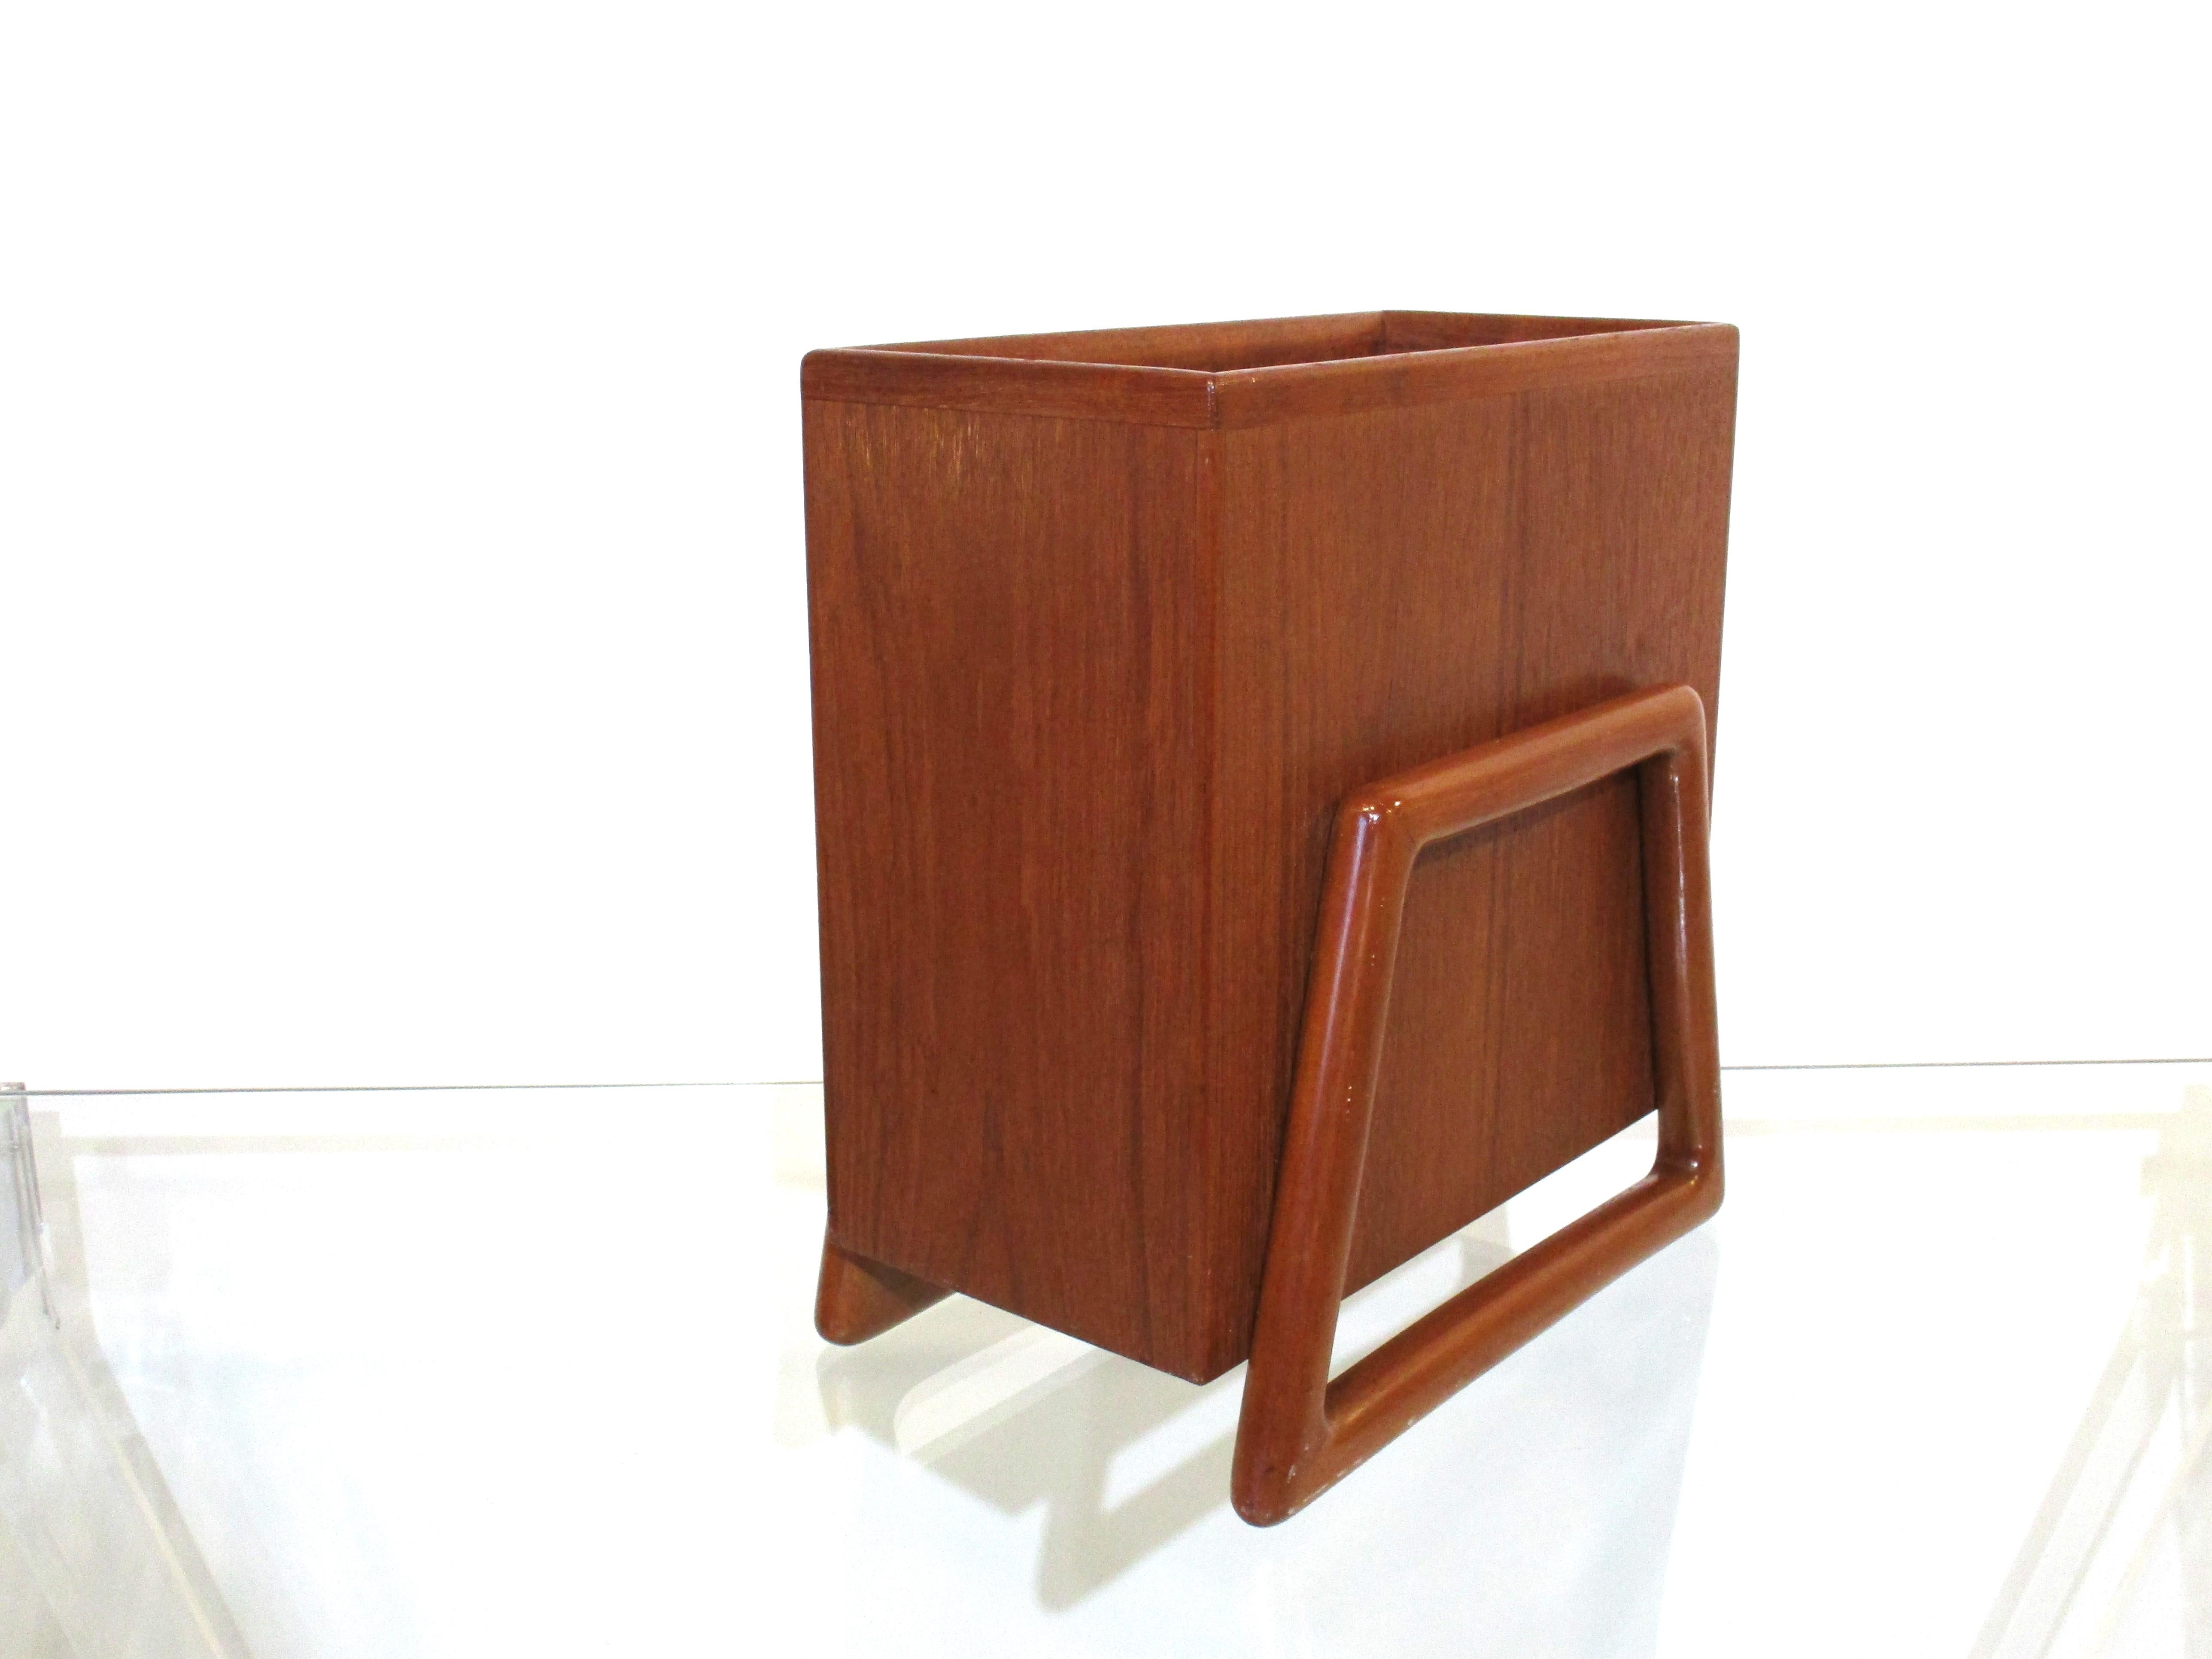 A very well crafted solid teak wood waste basket or magazine rack with stirrup styled legs a hallmark of the designer Svend Aage Madsen. Produced in 1962 and put into climate controlled storage since 1975 when removed for our ownership. The piece